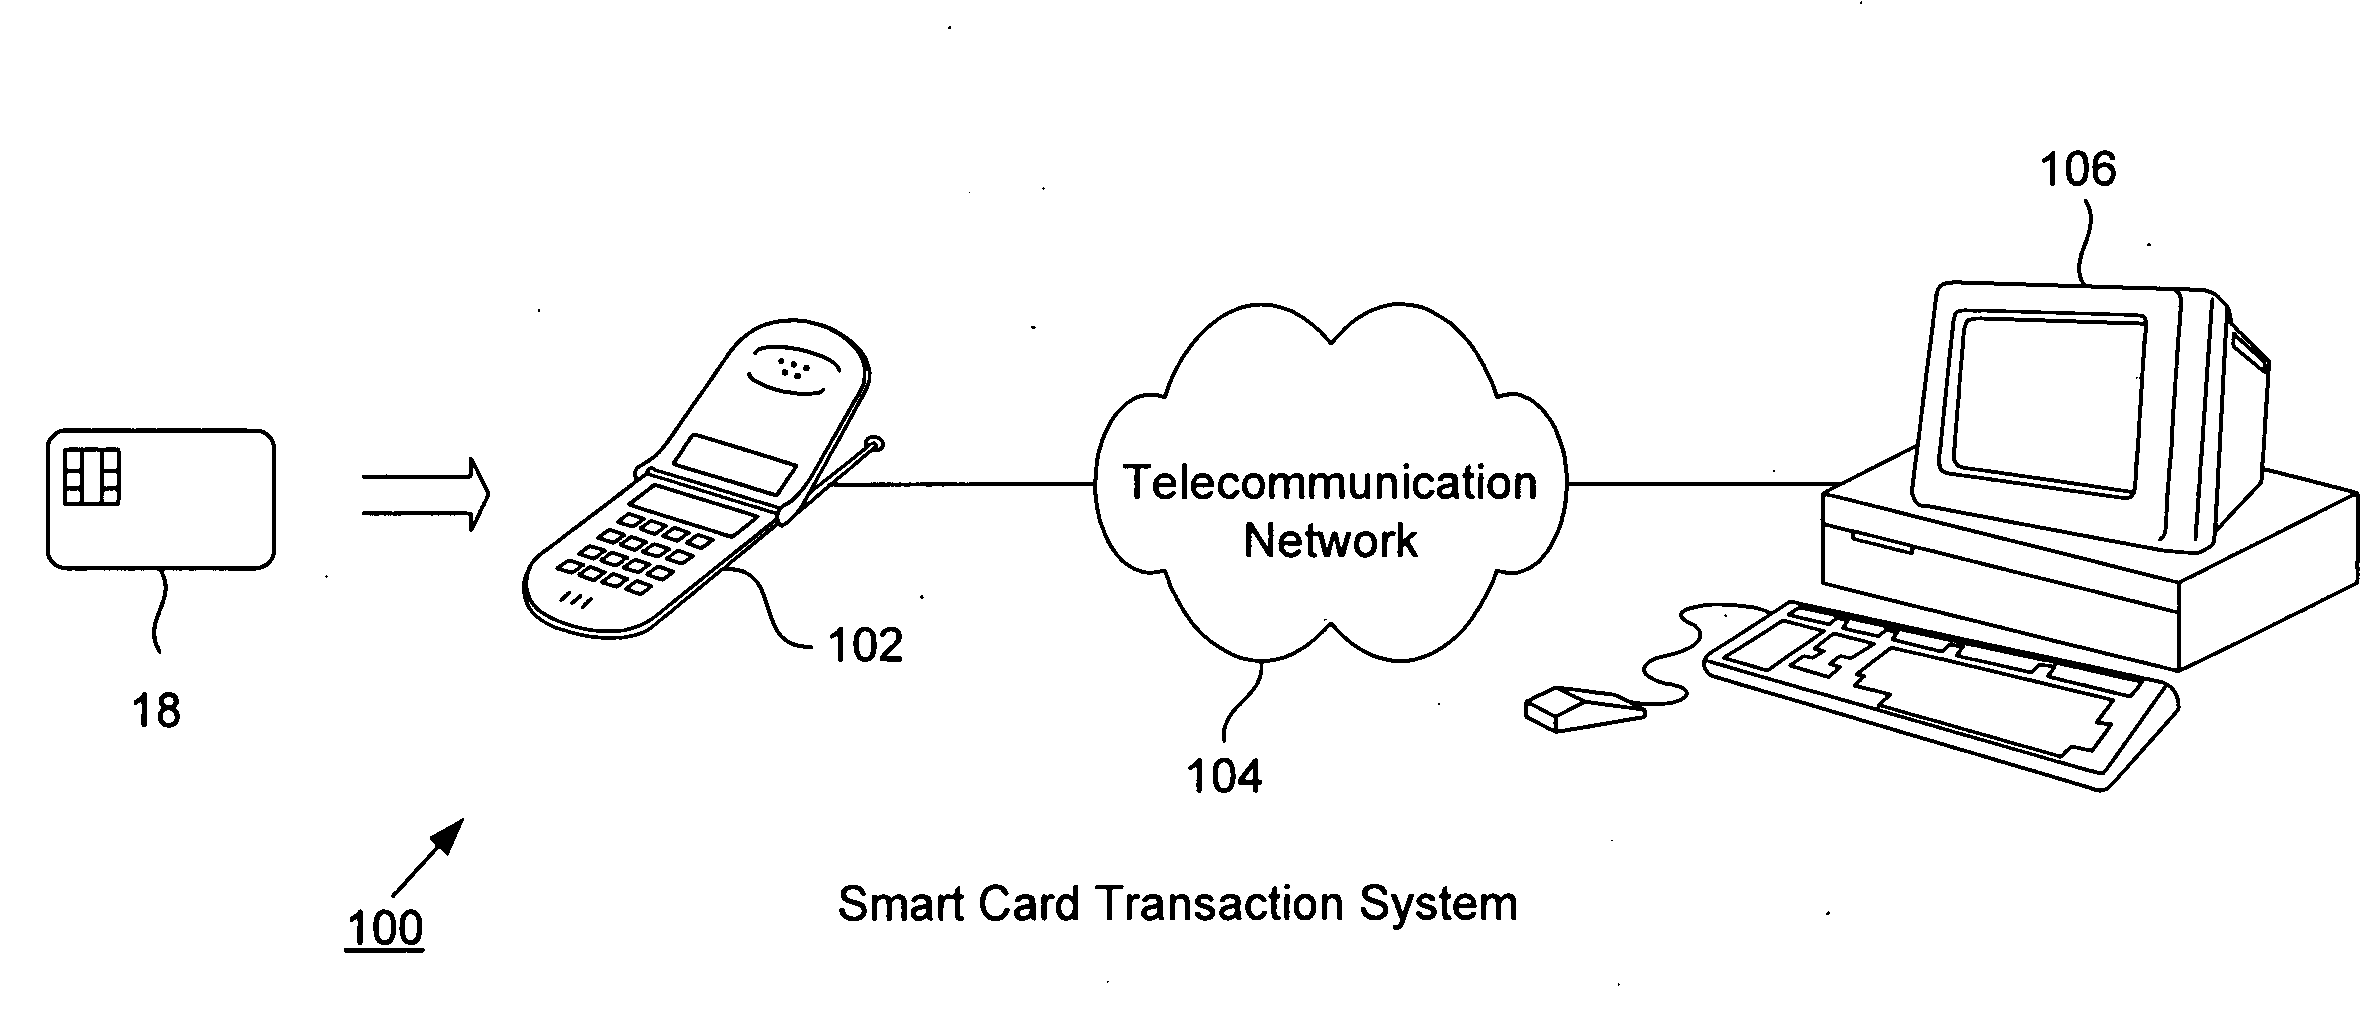 Smart card load and purchase transactions using wireless telecommunications network